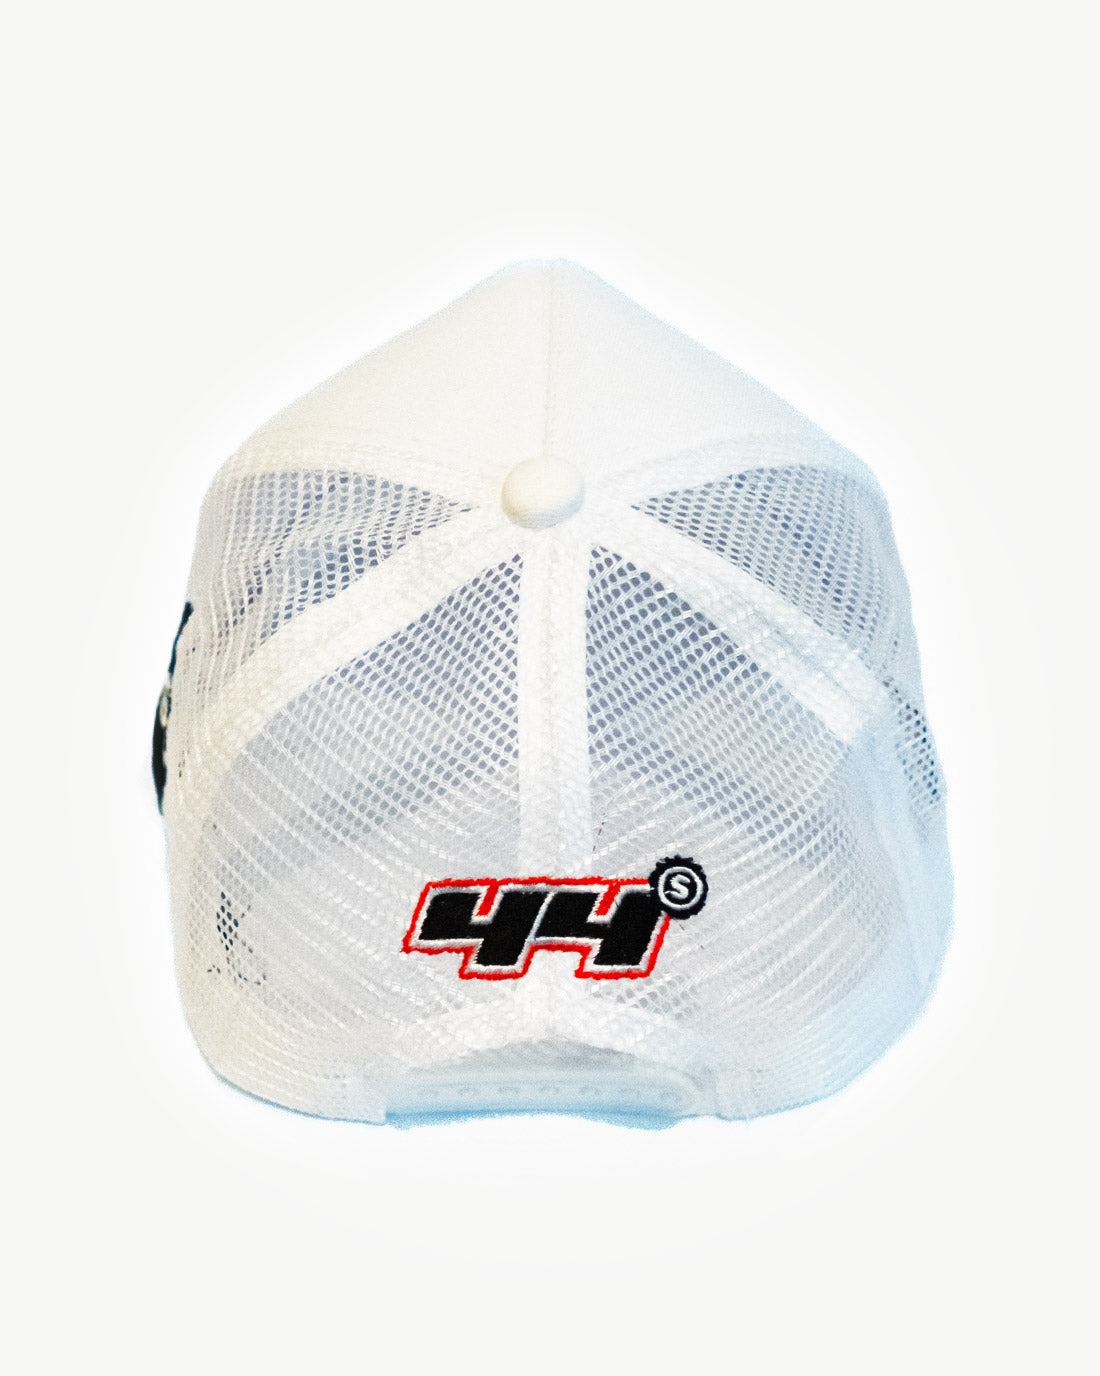 Back side of a super white mesh snapback hat with stylish patches.